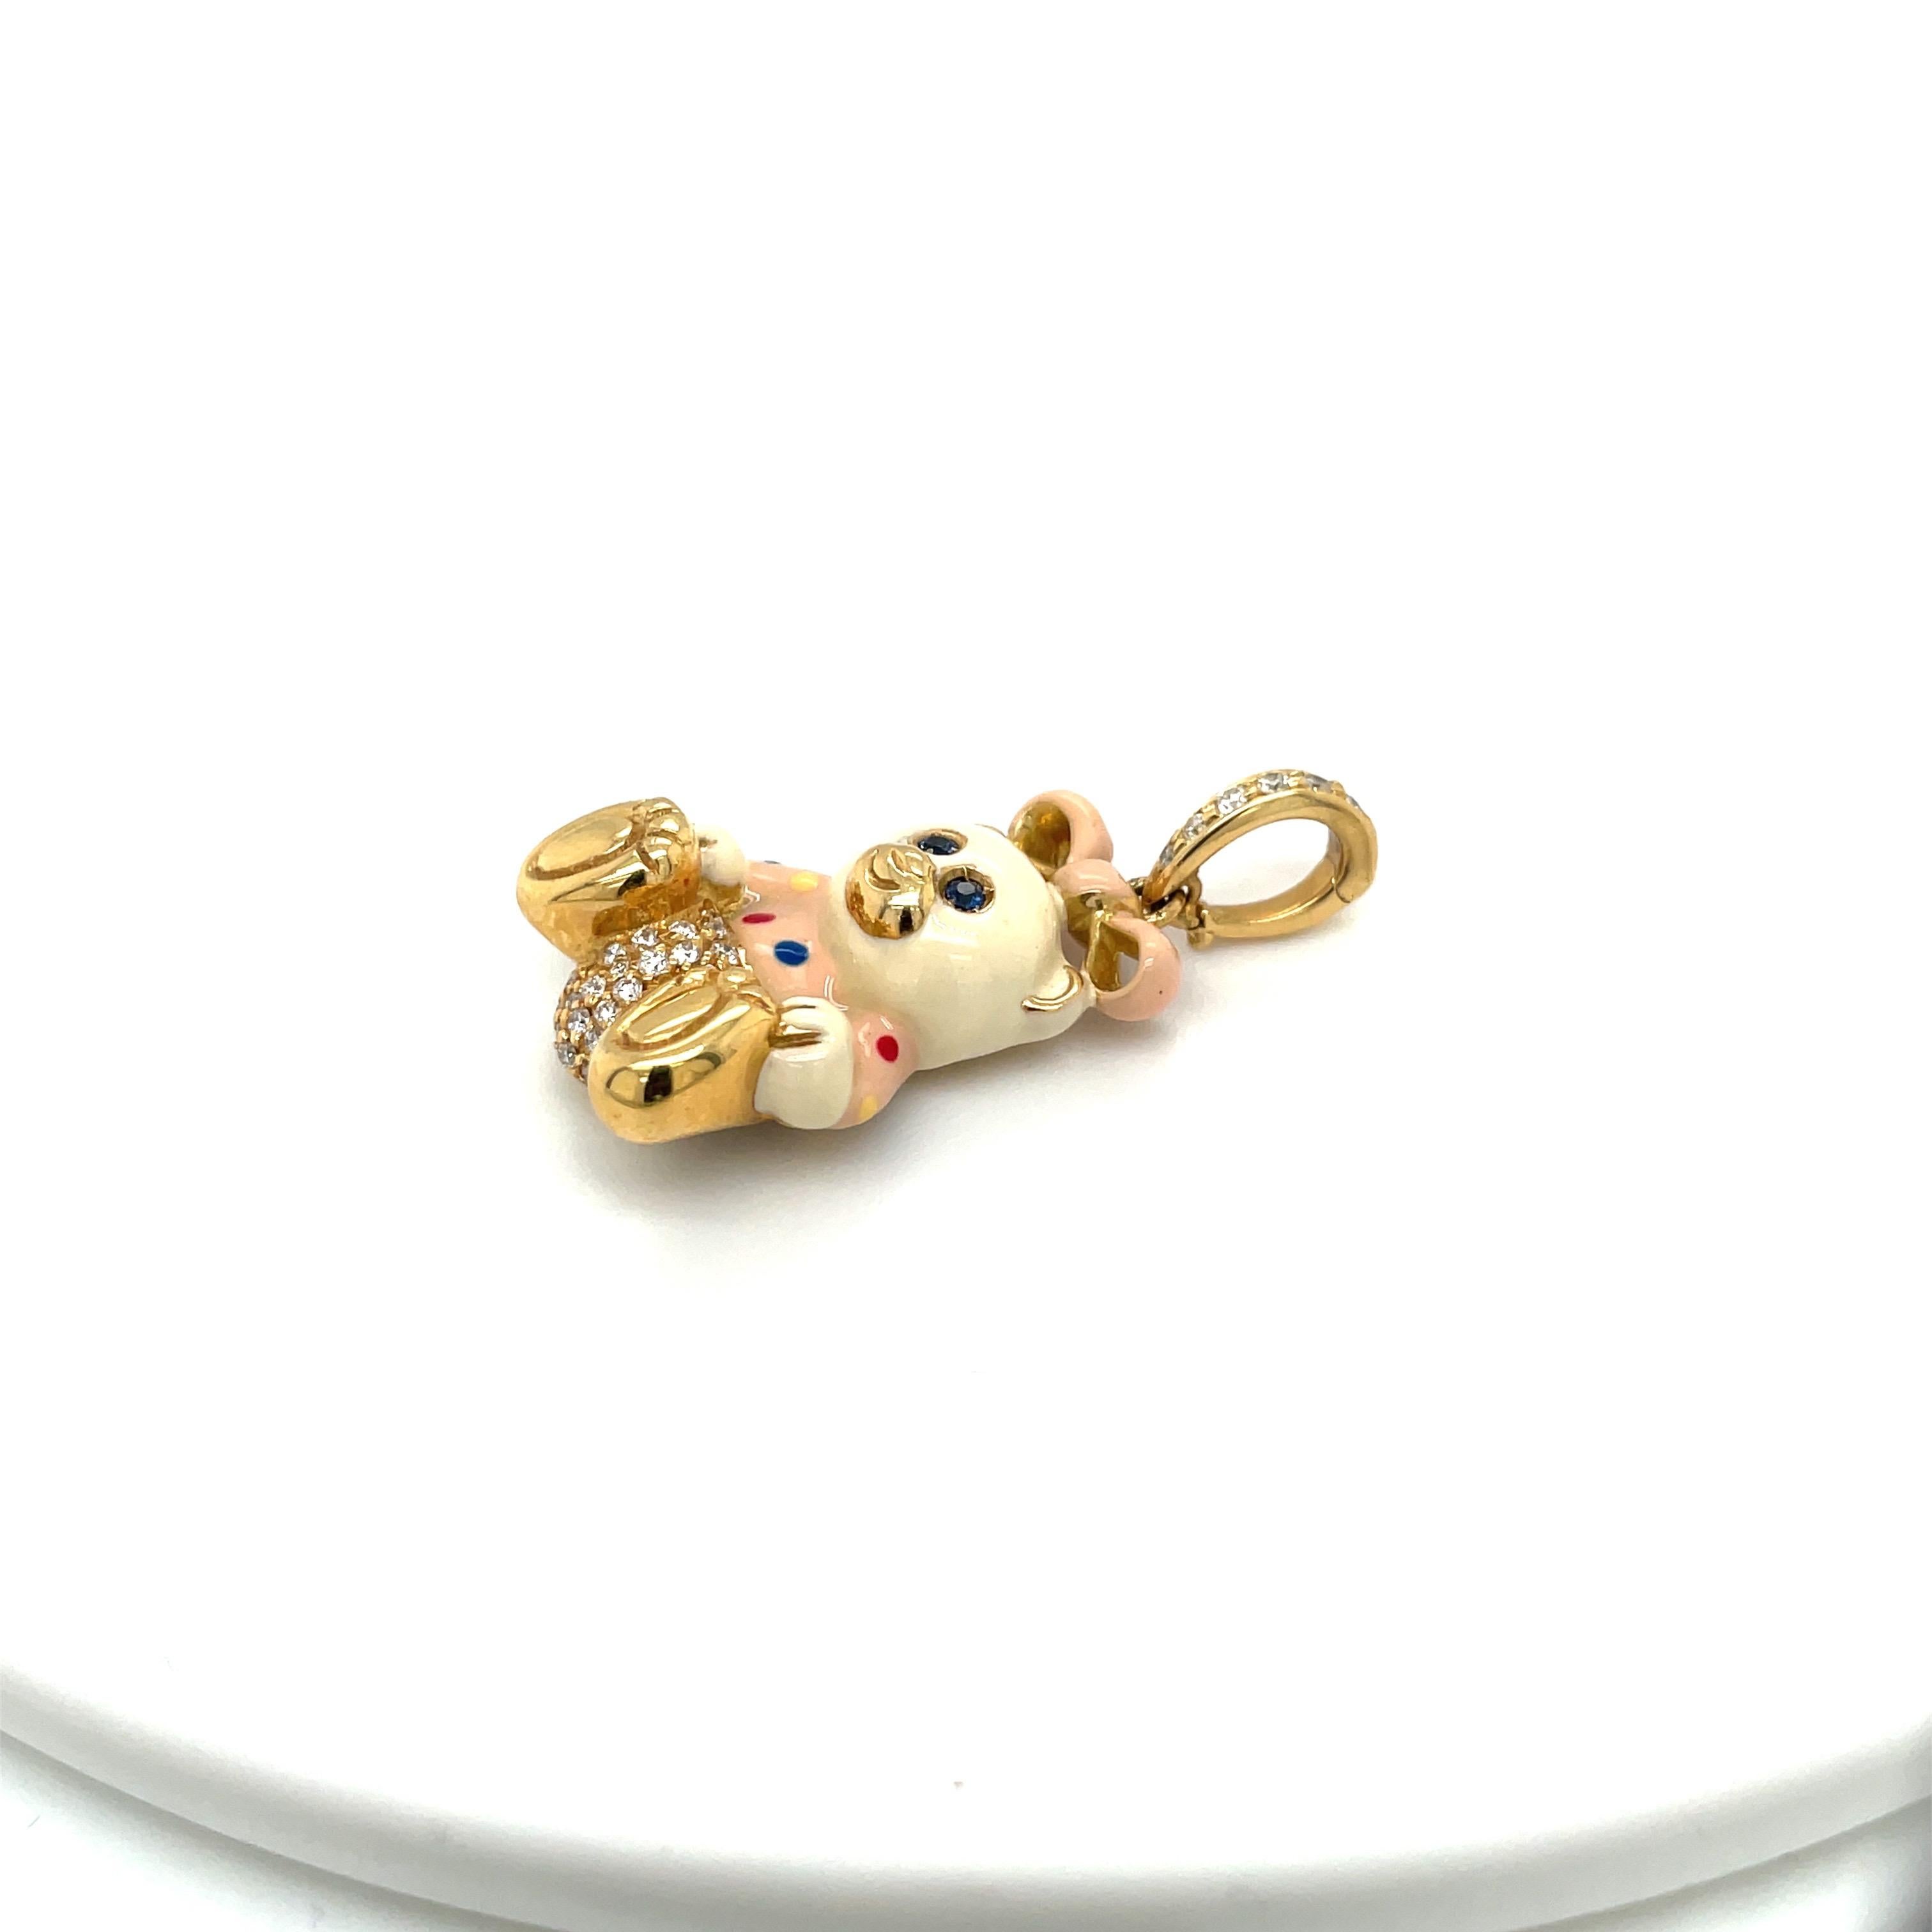 Just the cutest....Teddy bear charm made exclusively for Cellini by Ambrosi of Italy.

This 18 karat yellow gold teddy bear is set with a round brilliant pave diamond diaper. She has blue sapphire eyes . Her body is a milky white enamel and her